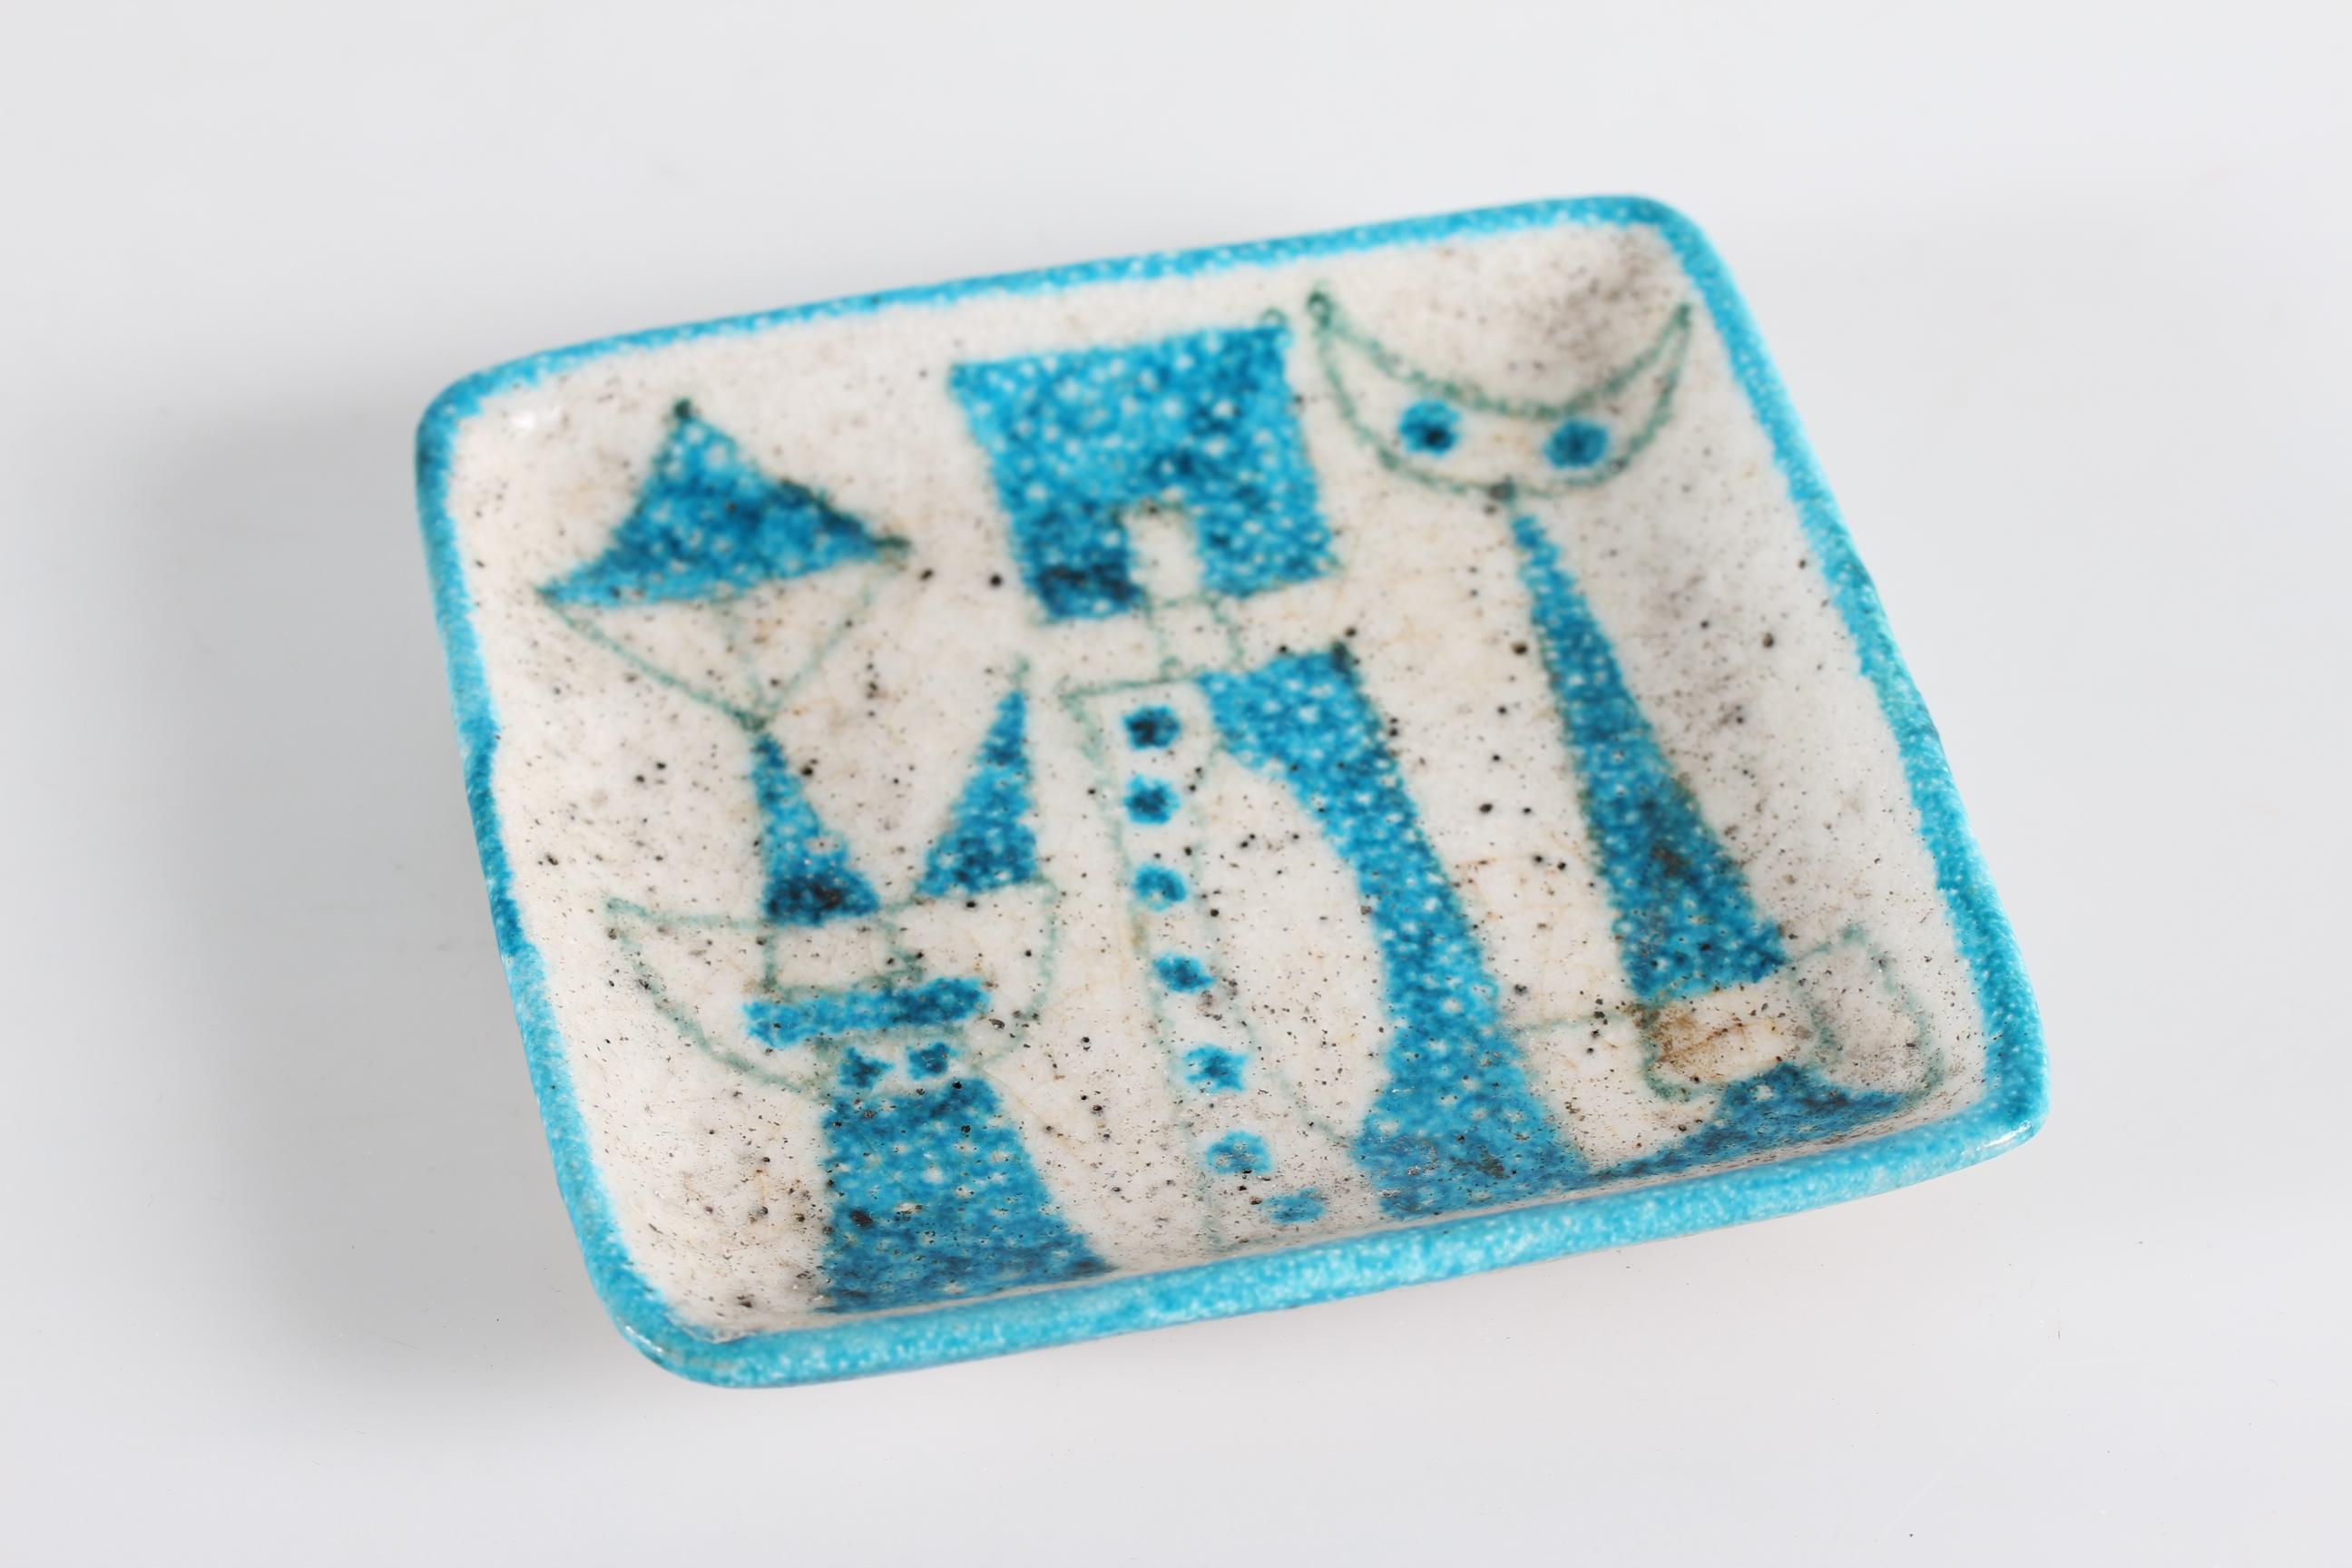 Decorative square ceramic tray by Italian ceramist Guido Gambone (1909-1969), circa 1950´s.
The tray has a decoration of 3 cubist figures in bright turquoise and light green colors on a white background.

Signed: Gambone Italy

Very nice